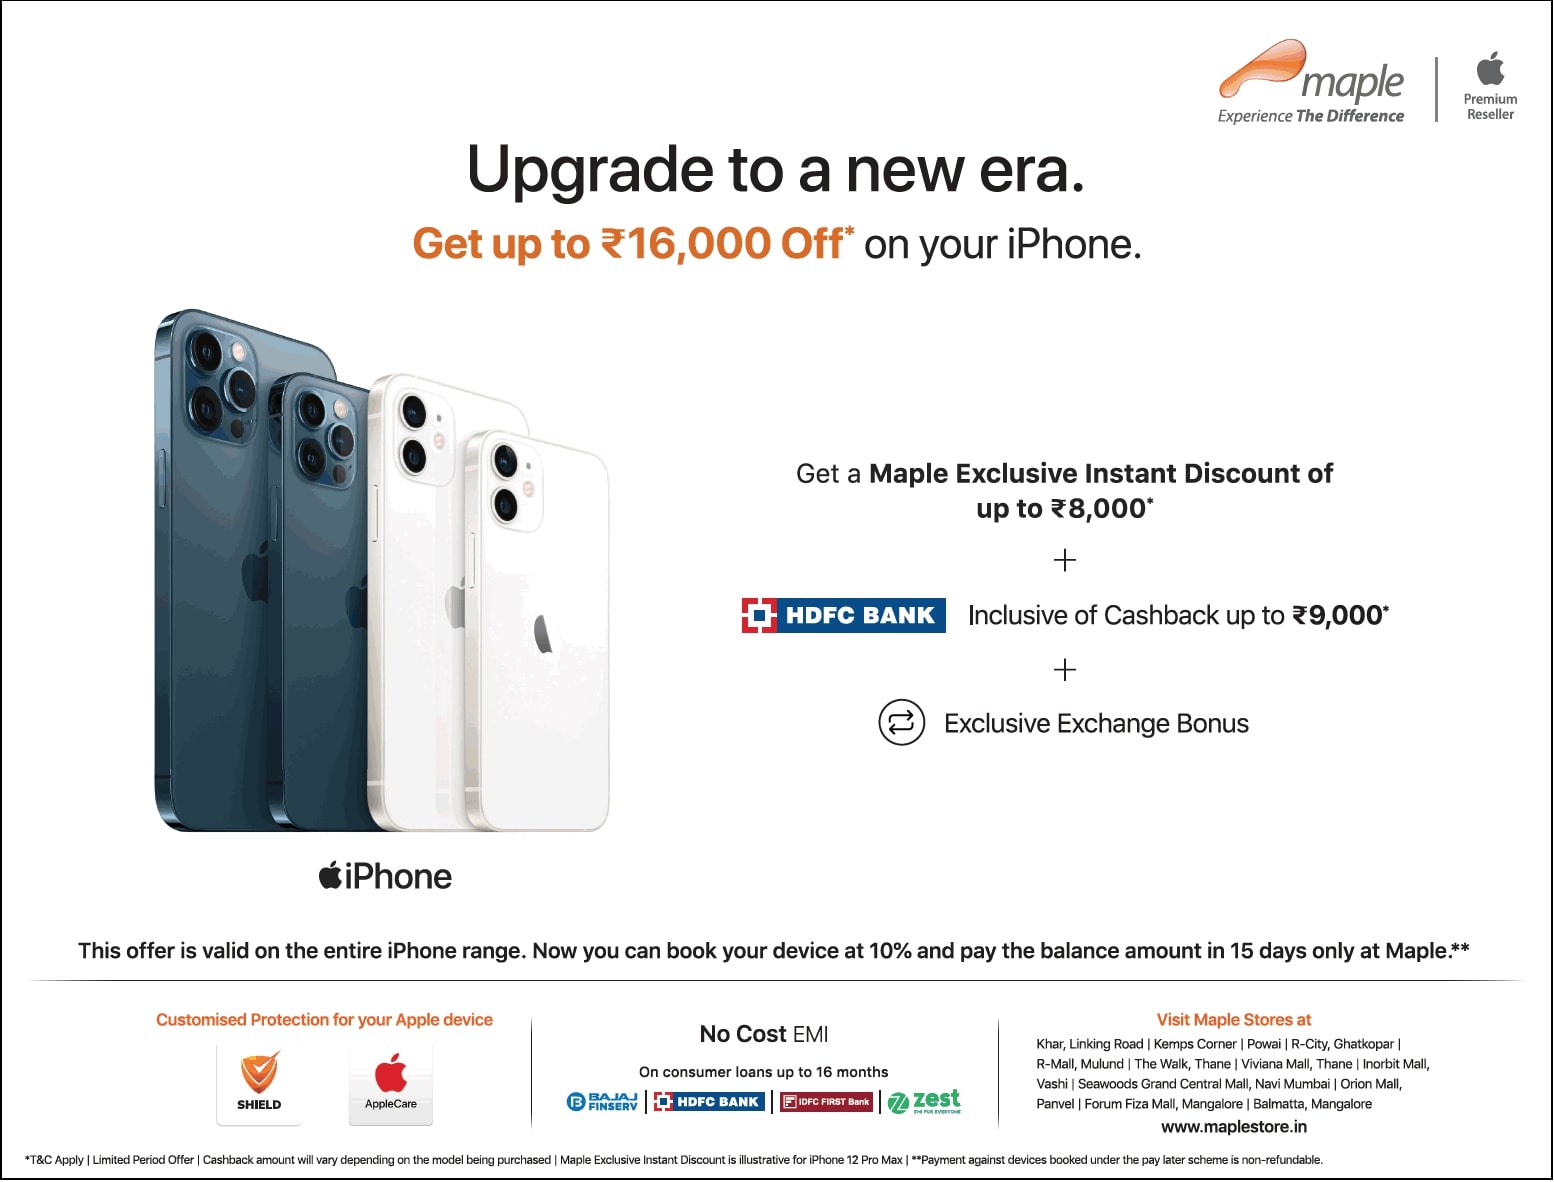 iphone-maple-get-upto-rupees-16000-off-ad-bombay-times-23-01-2021